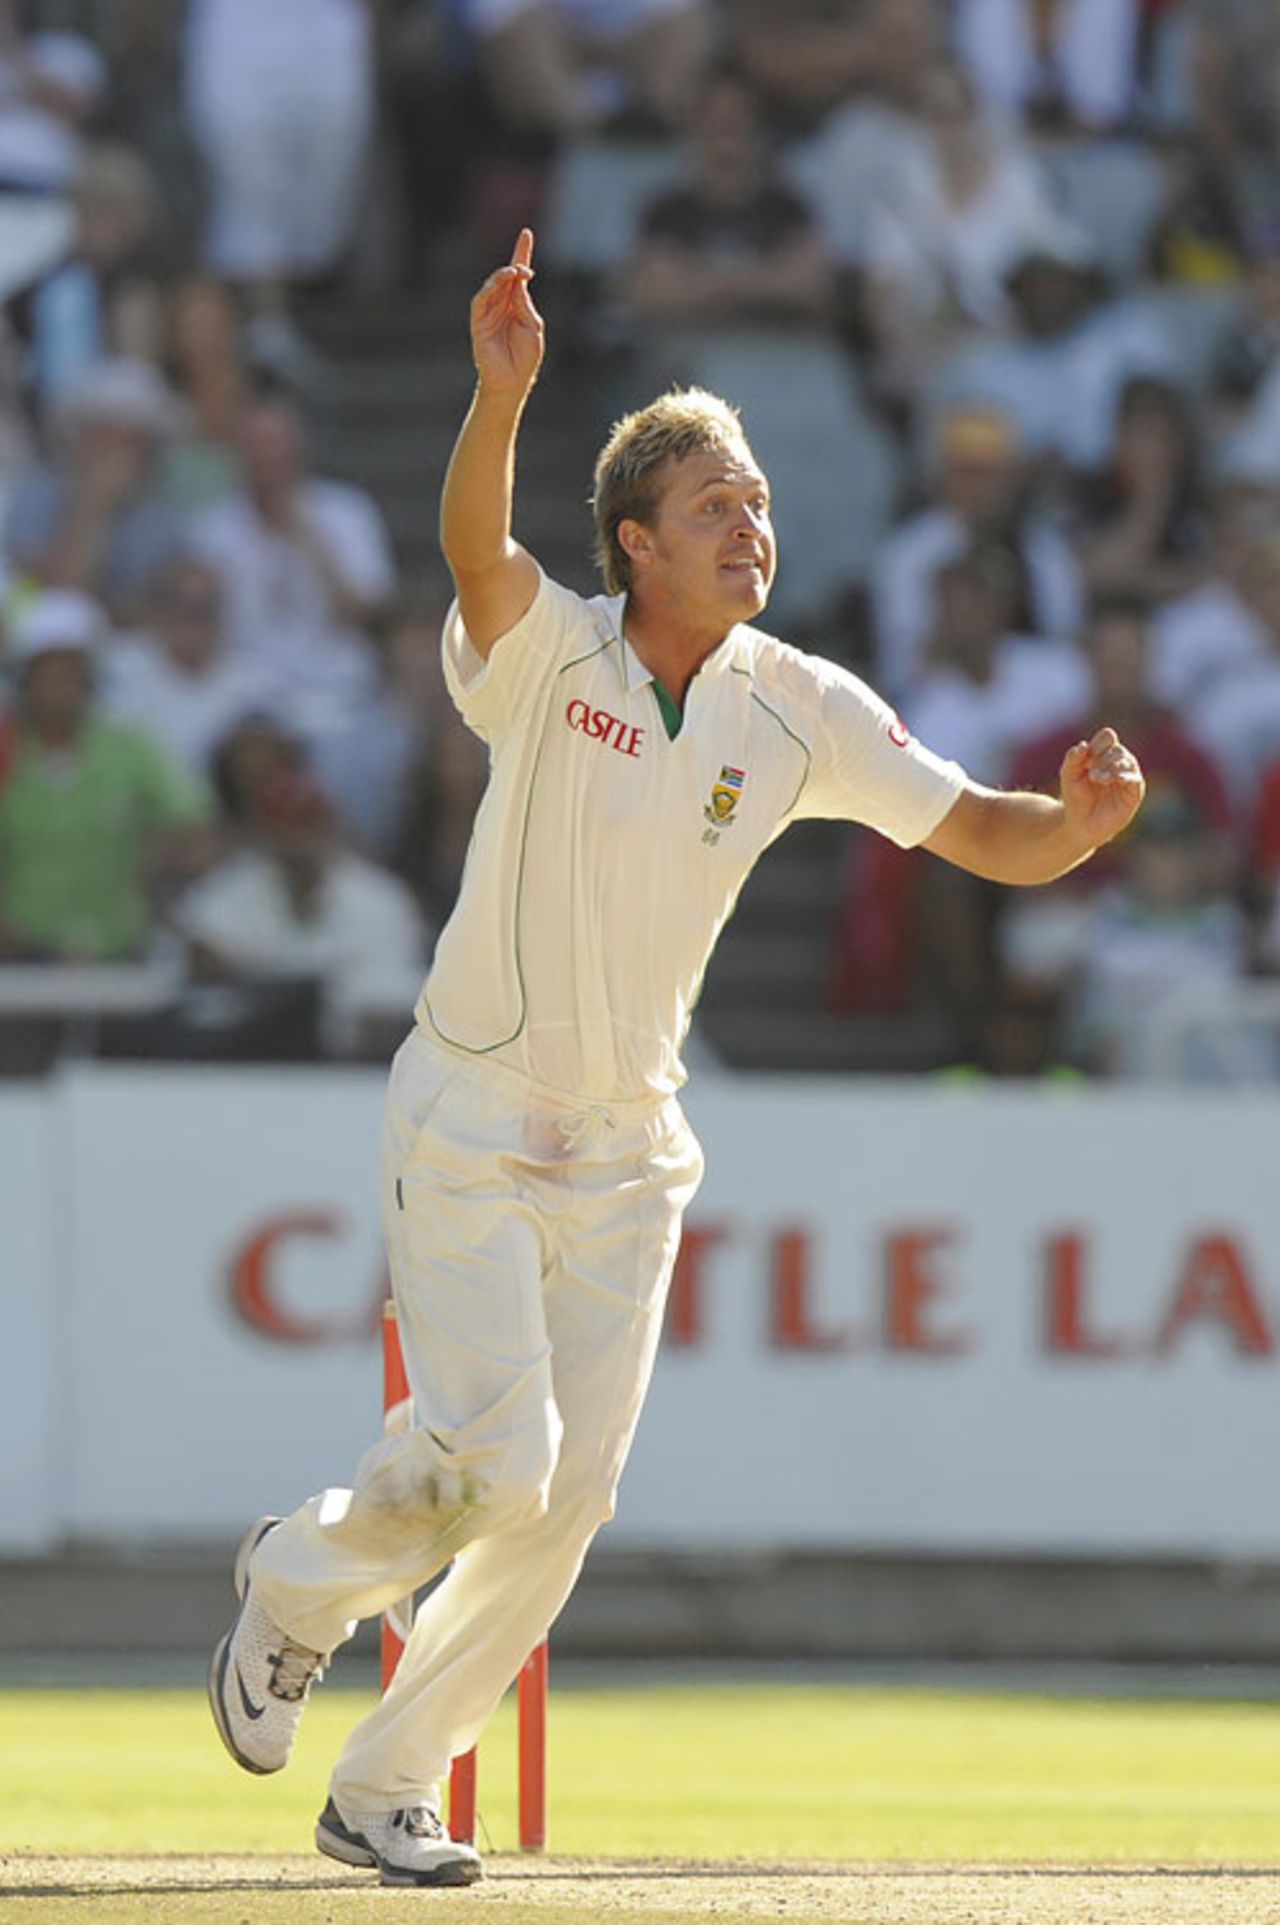 Paul Harris appeals for Stuart Broad's wicket, England v South Africa, 3rd Test, Cape Town, 7 January, 2010
